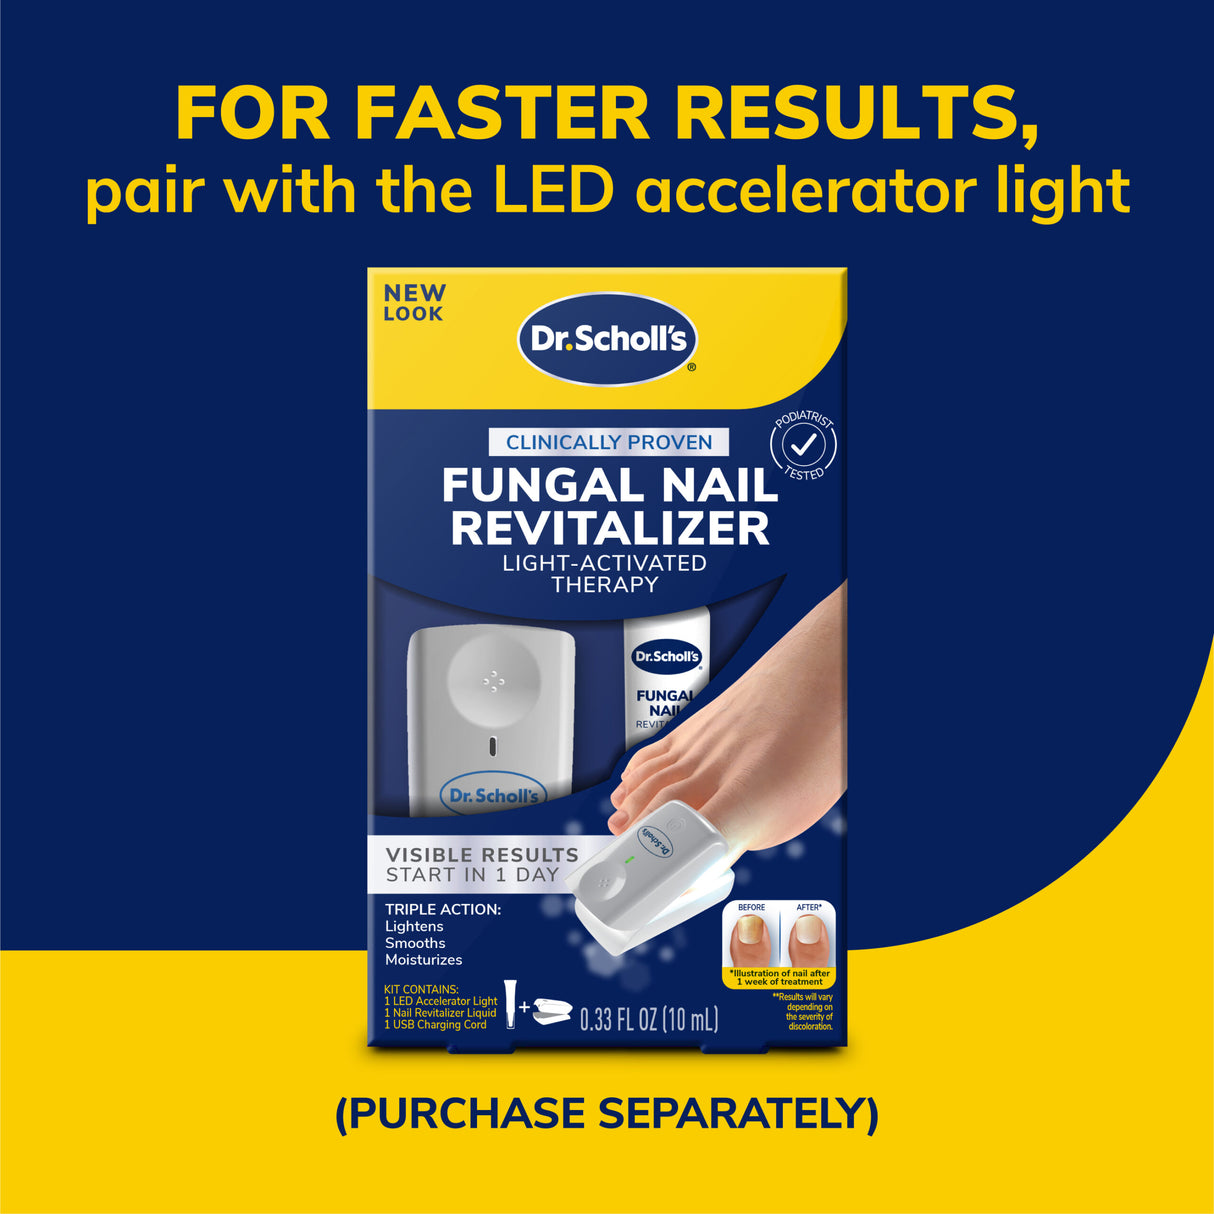 image of for faster results pair with LED accelerator ligth